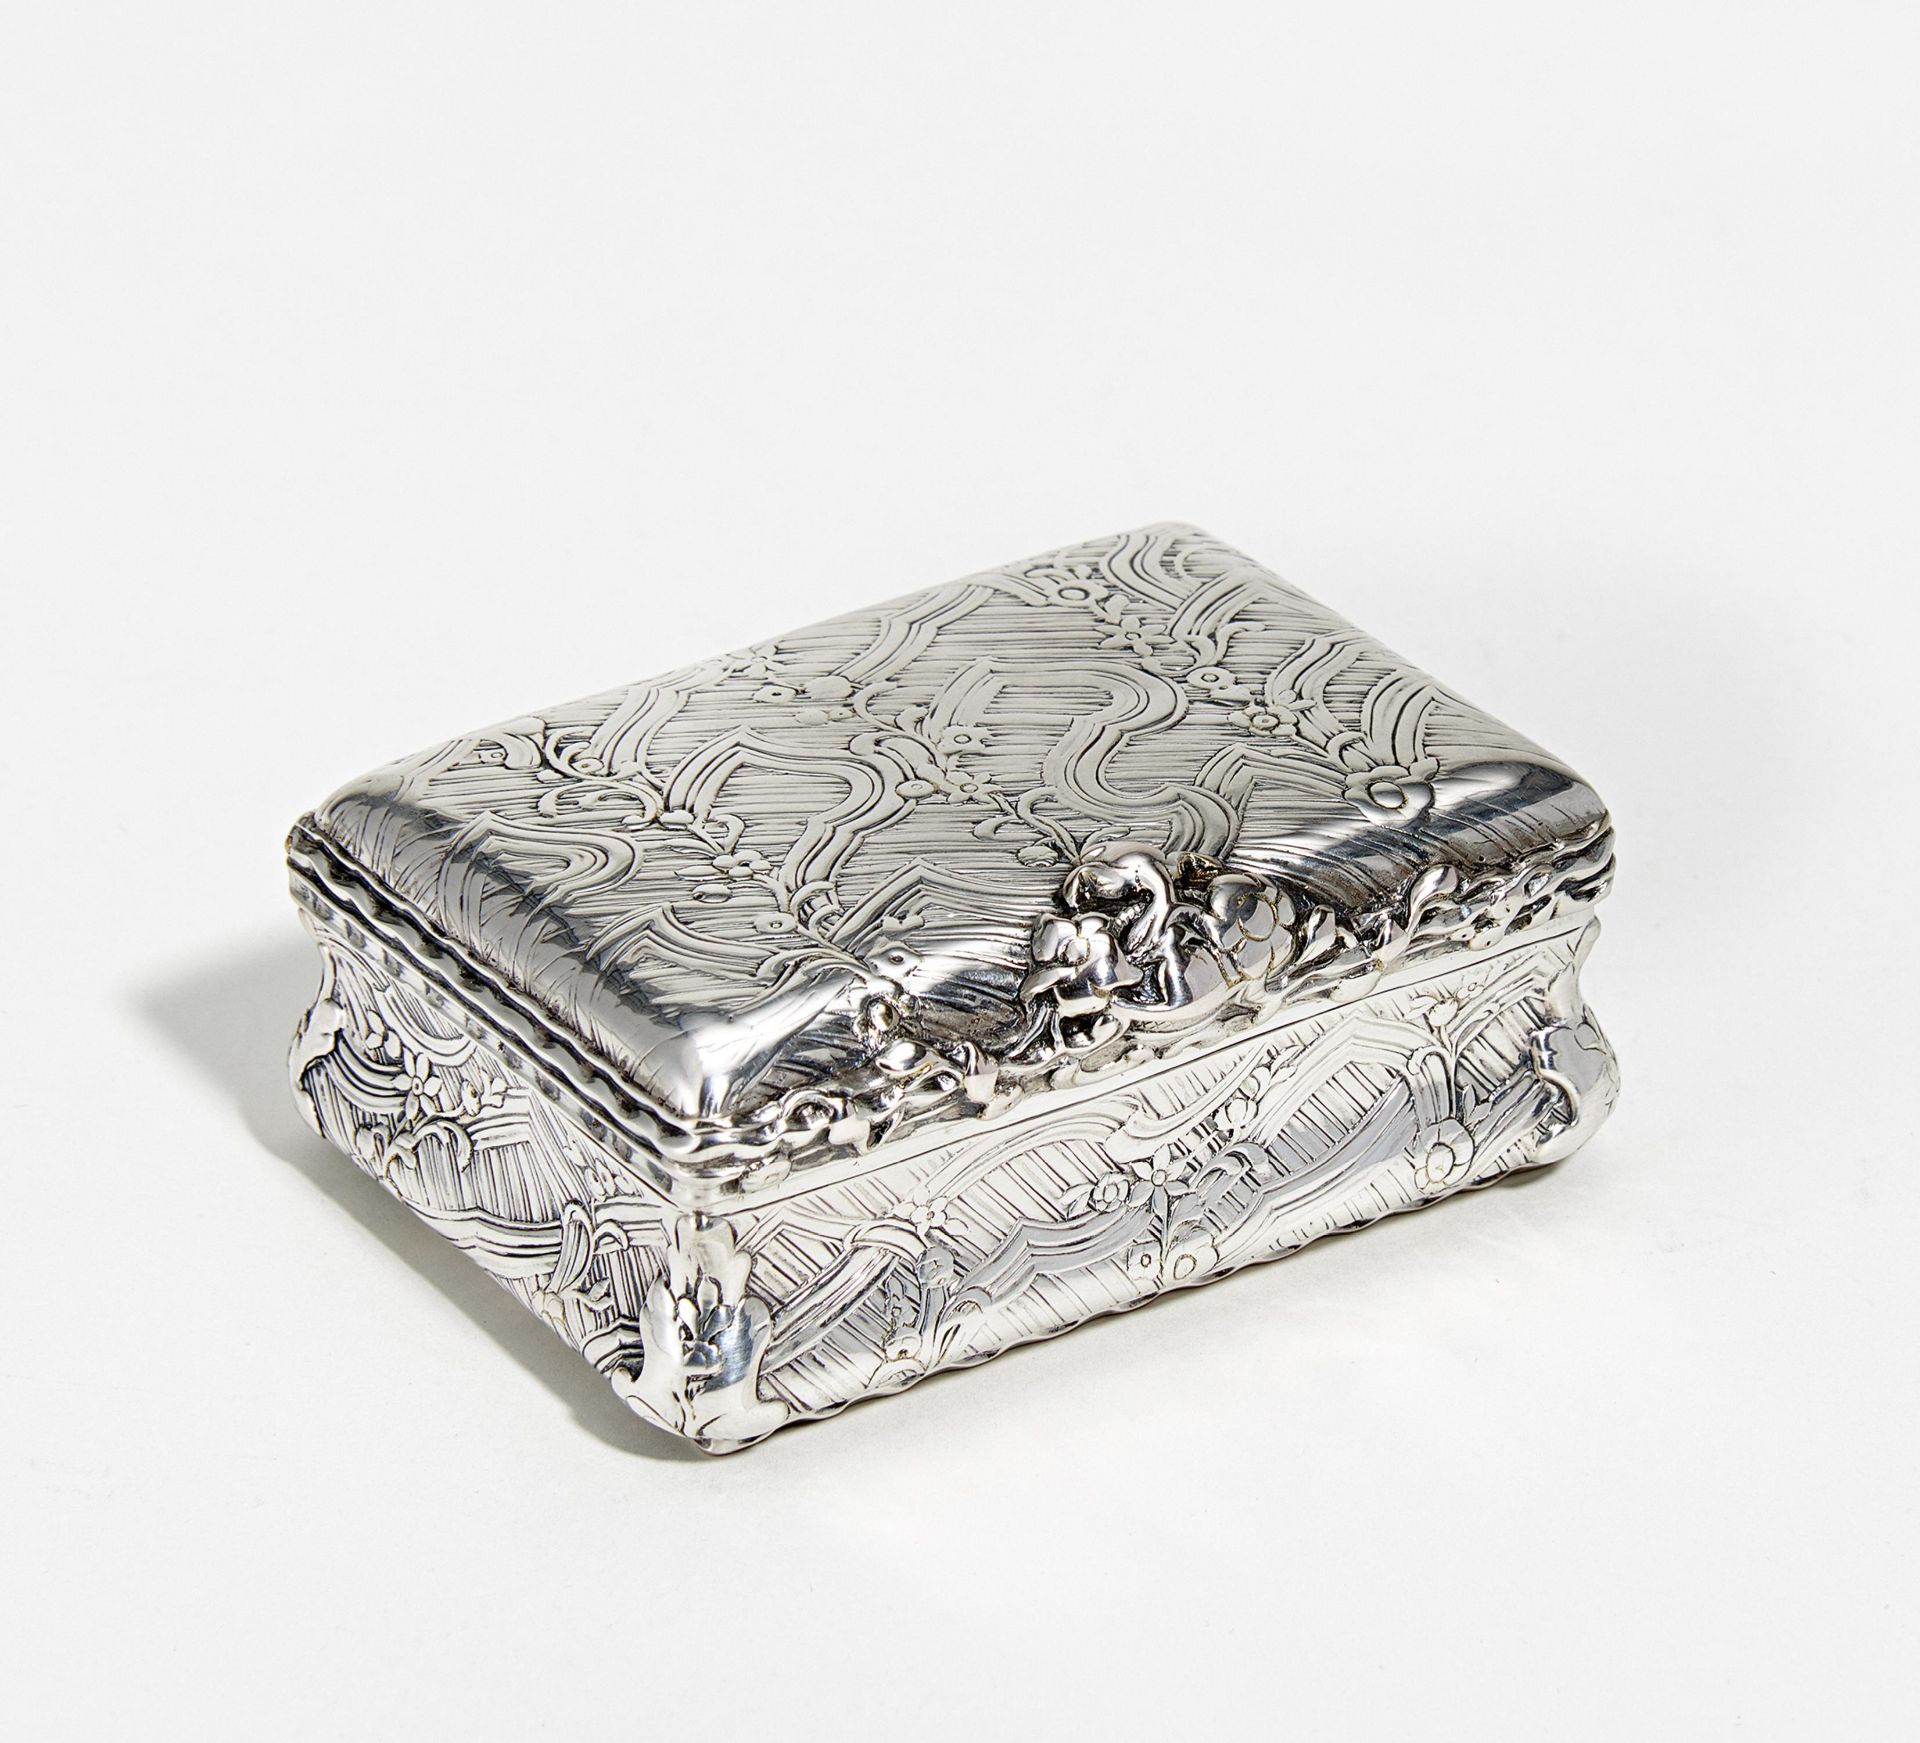 Silver snuffbox with flower tendrils